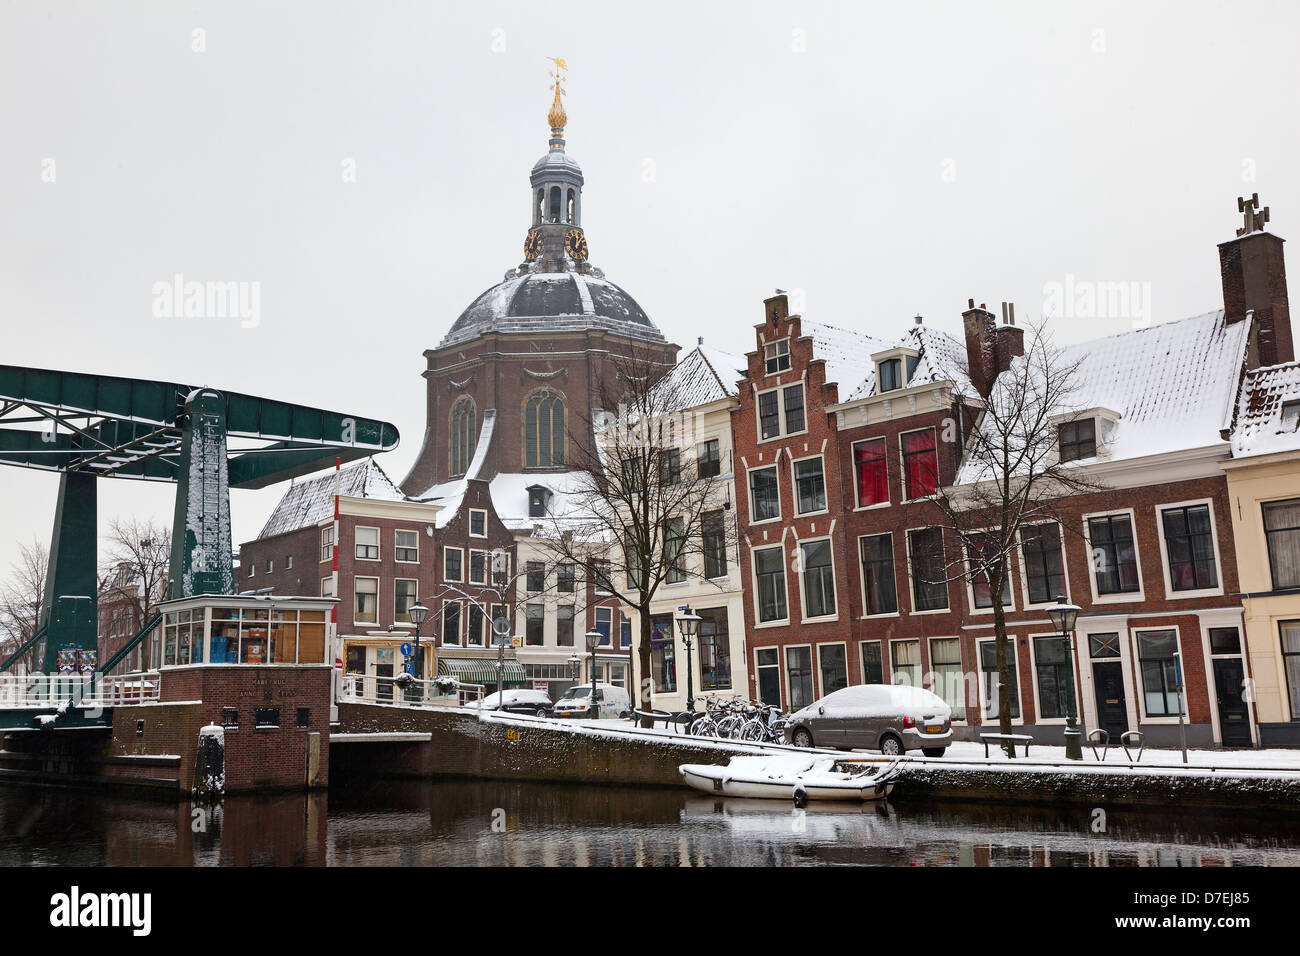 Snow in the streets of Leiden, Holland Stock Photo